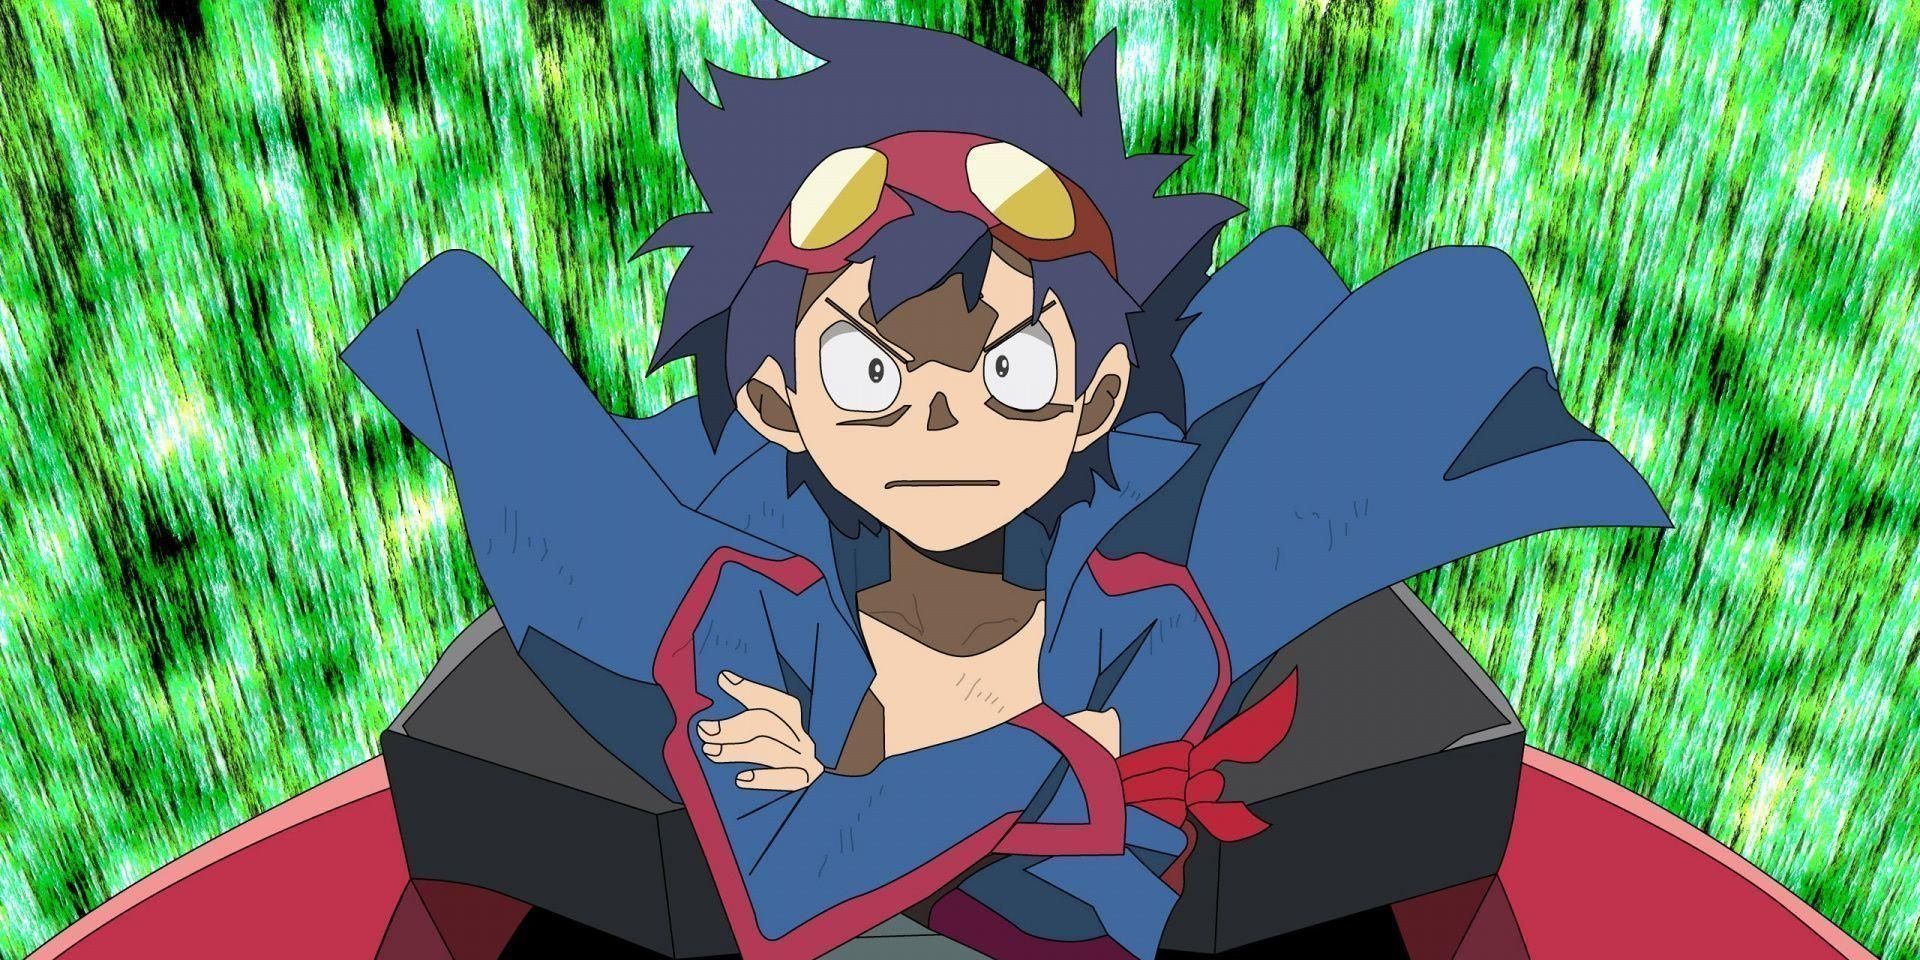 Gurren Lagann Simon with his arms crossed and a determined look on his face